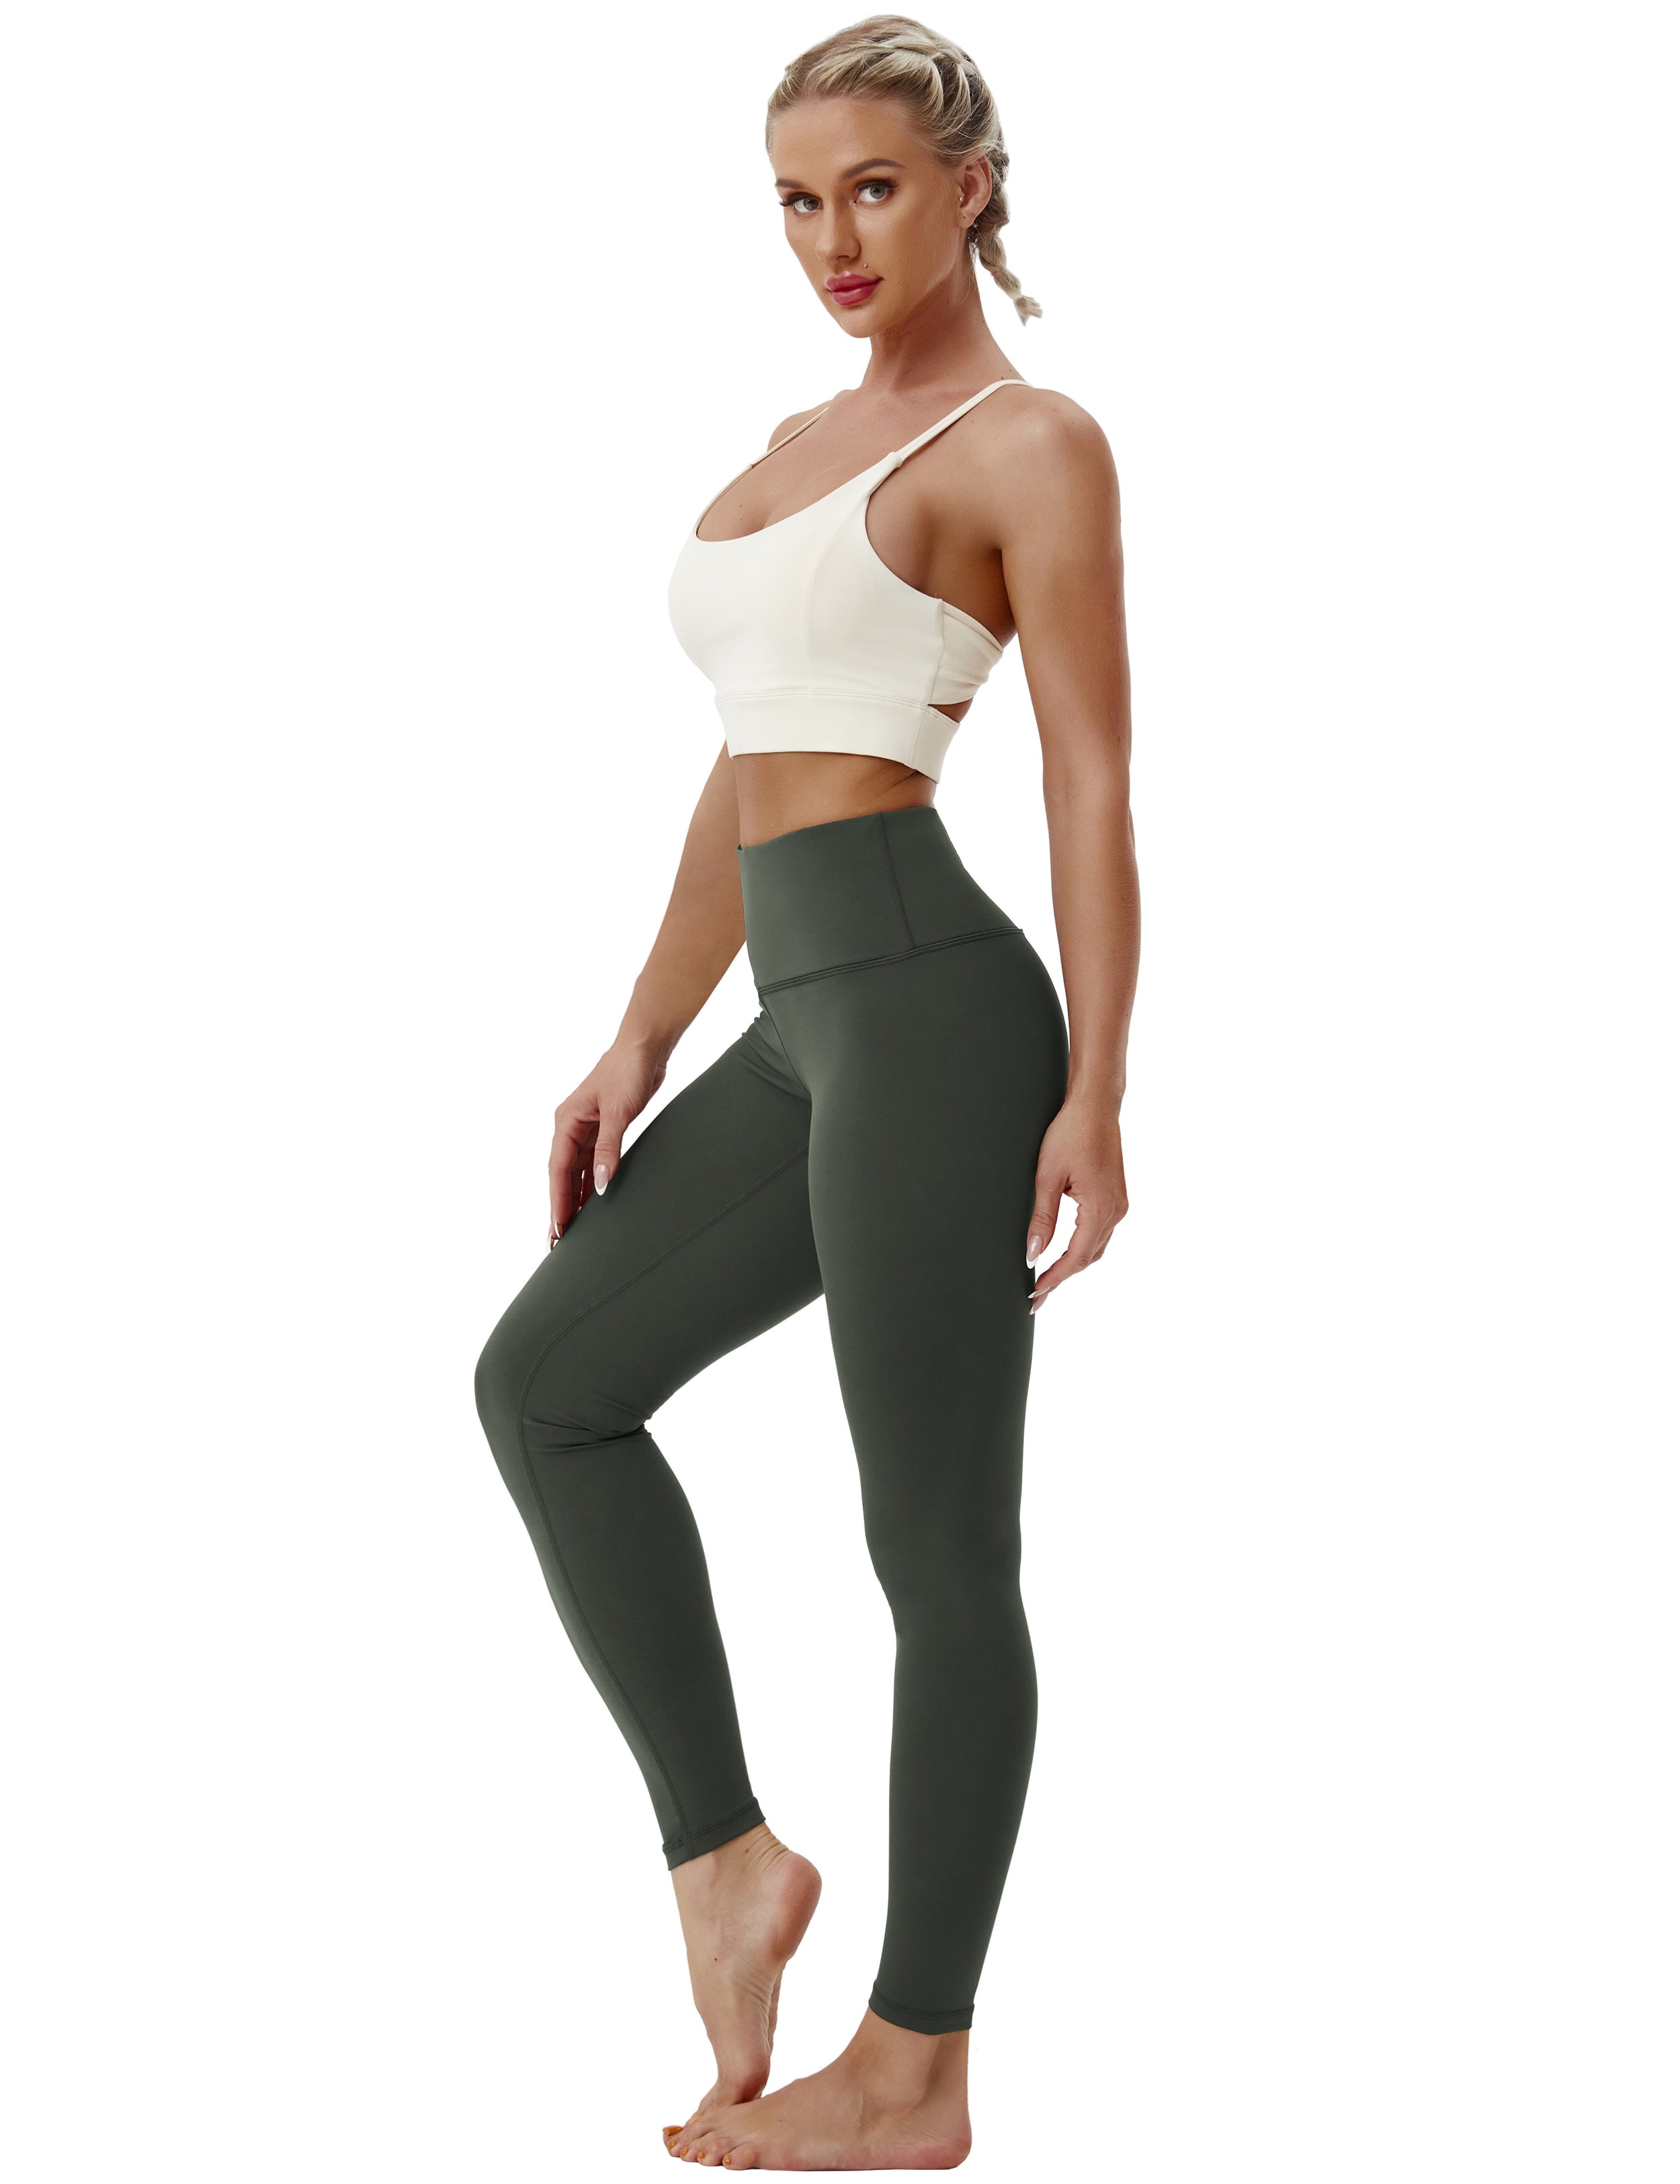 High Waist Biking Pants olivegray 75%Nylon/25%Spandex Fabric doesn't attract lint easily 4-way stretch No see-through Moisture-wicking Tummy control Inner pocket Four lengths